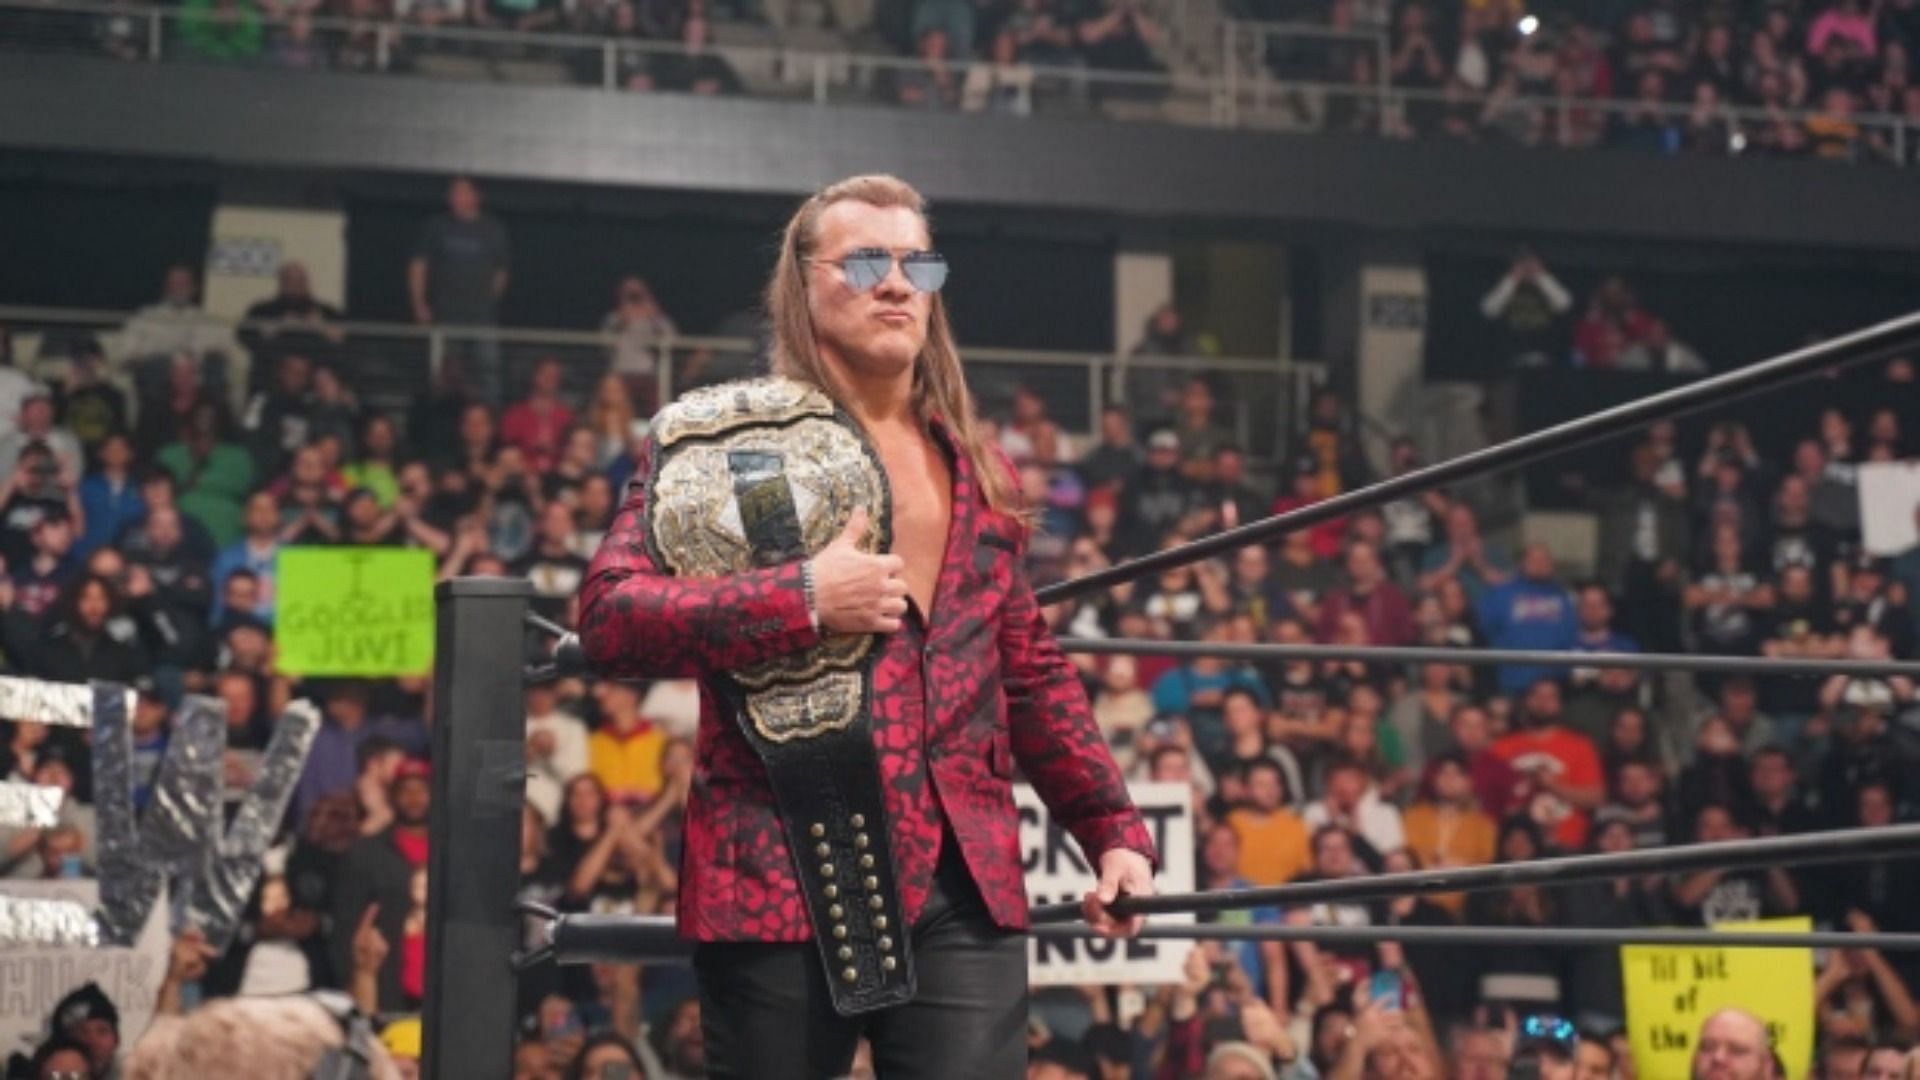 Chris Jericho is one of the oldest active performers in AEW.